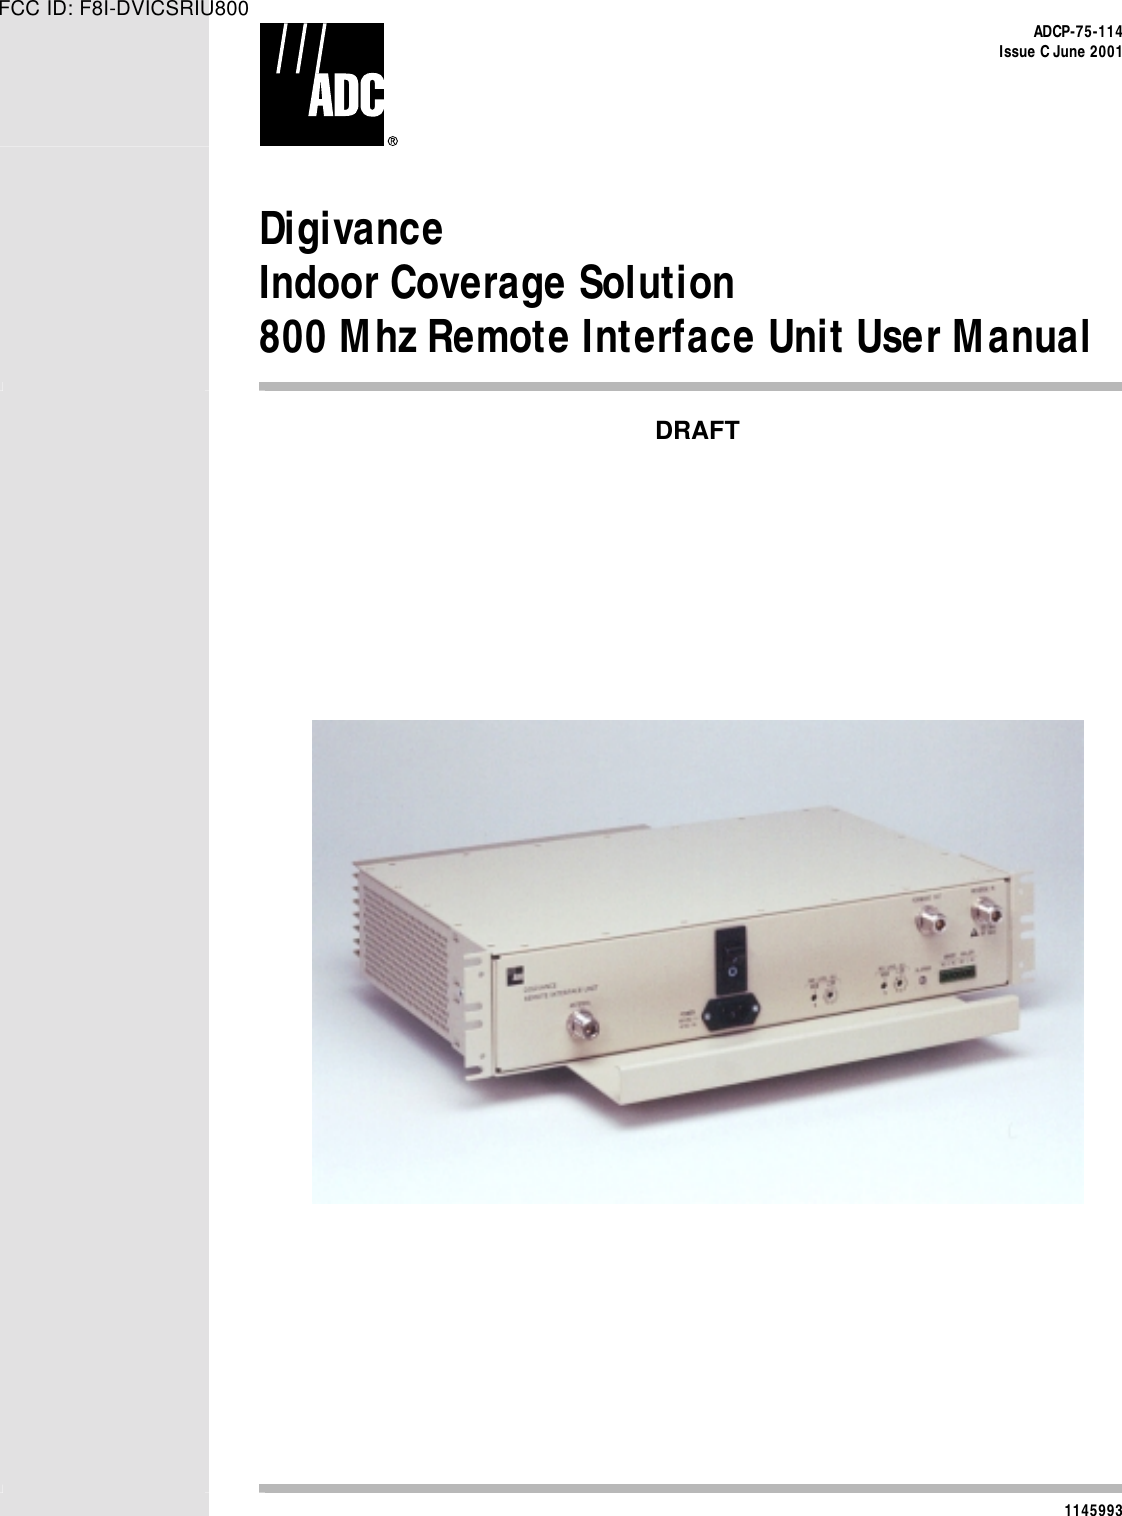     ADCP-75-114 Issue C June 2001 Digivance Indoor Coverage Solution 800 Mhz Remote Interface Unit User ManualDRAFT1145993 FCC ID: F8I-DVICSRIU800